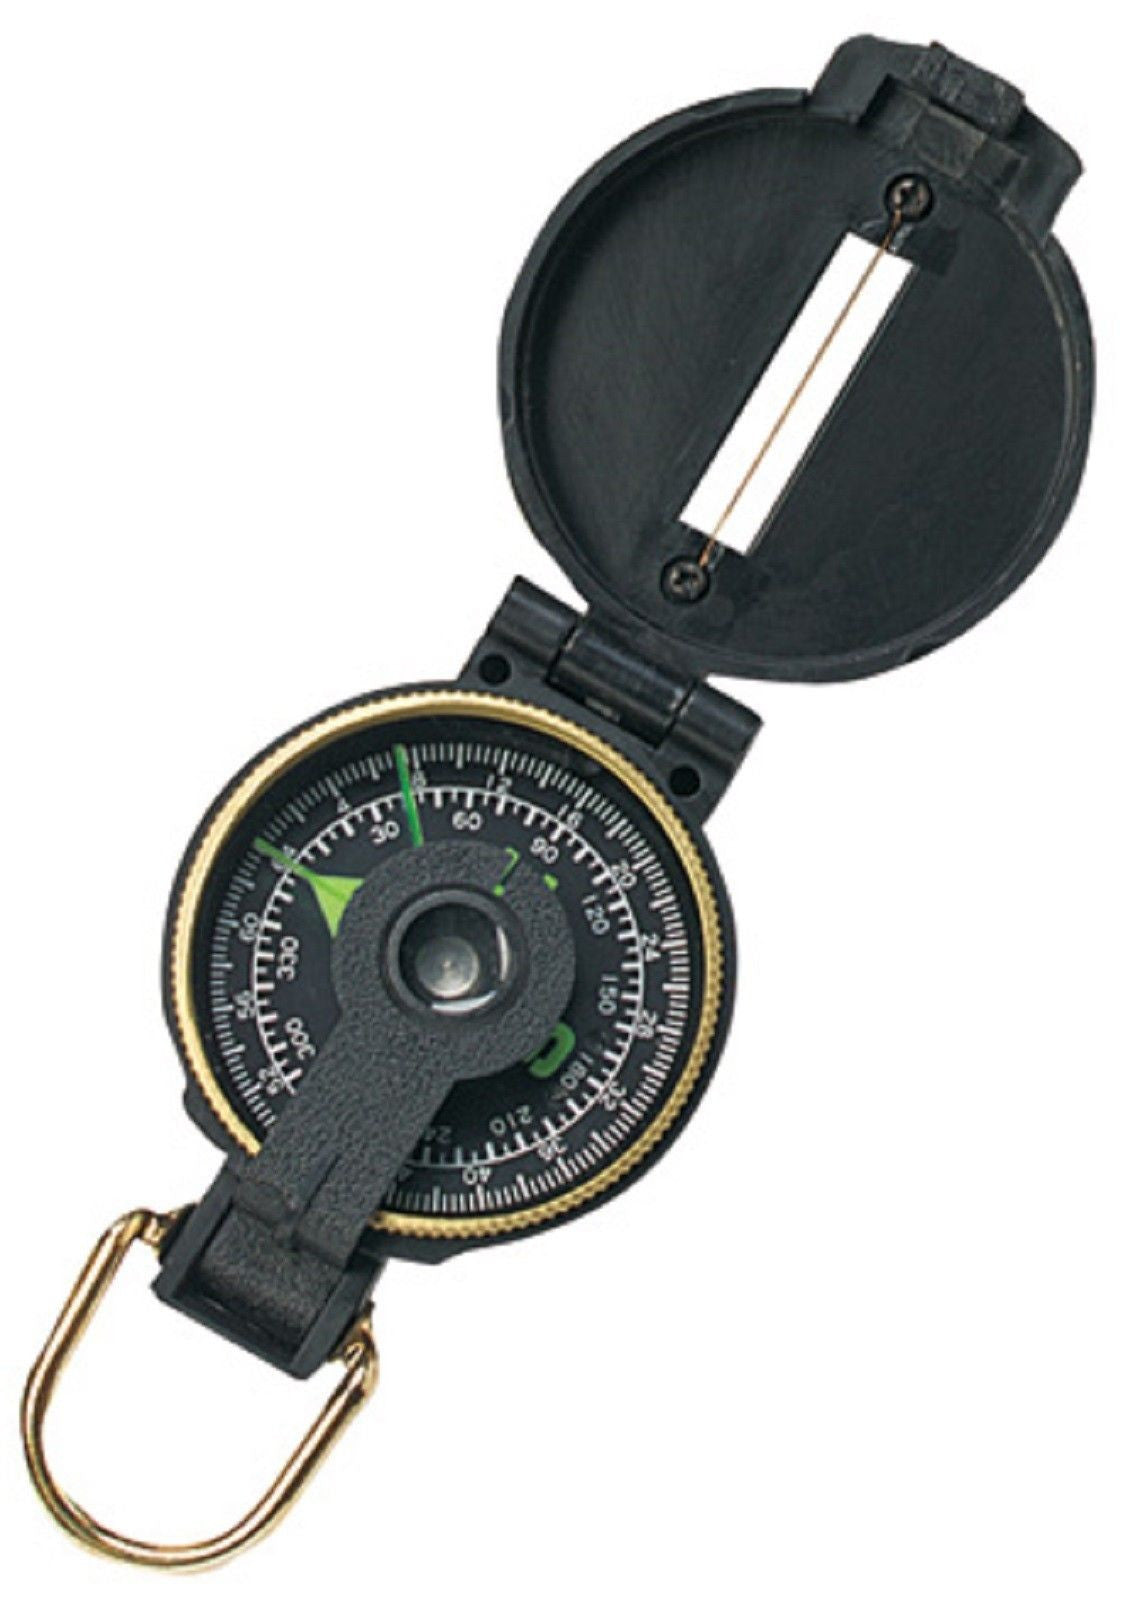 Black Plastic Lensatic Compass - Great For Camping/Hiking Scouts Survival & More